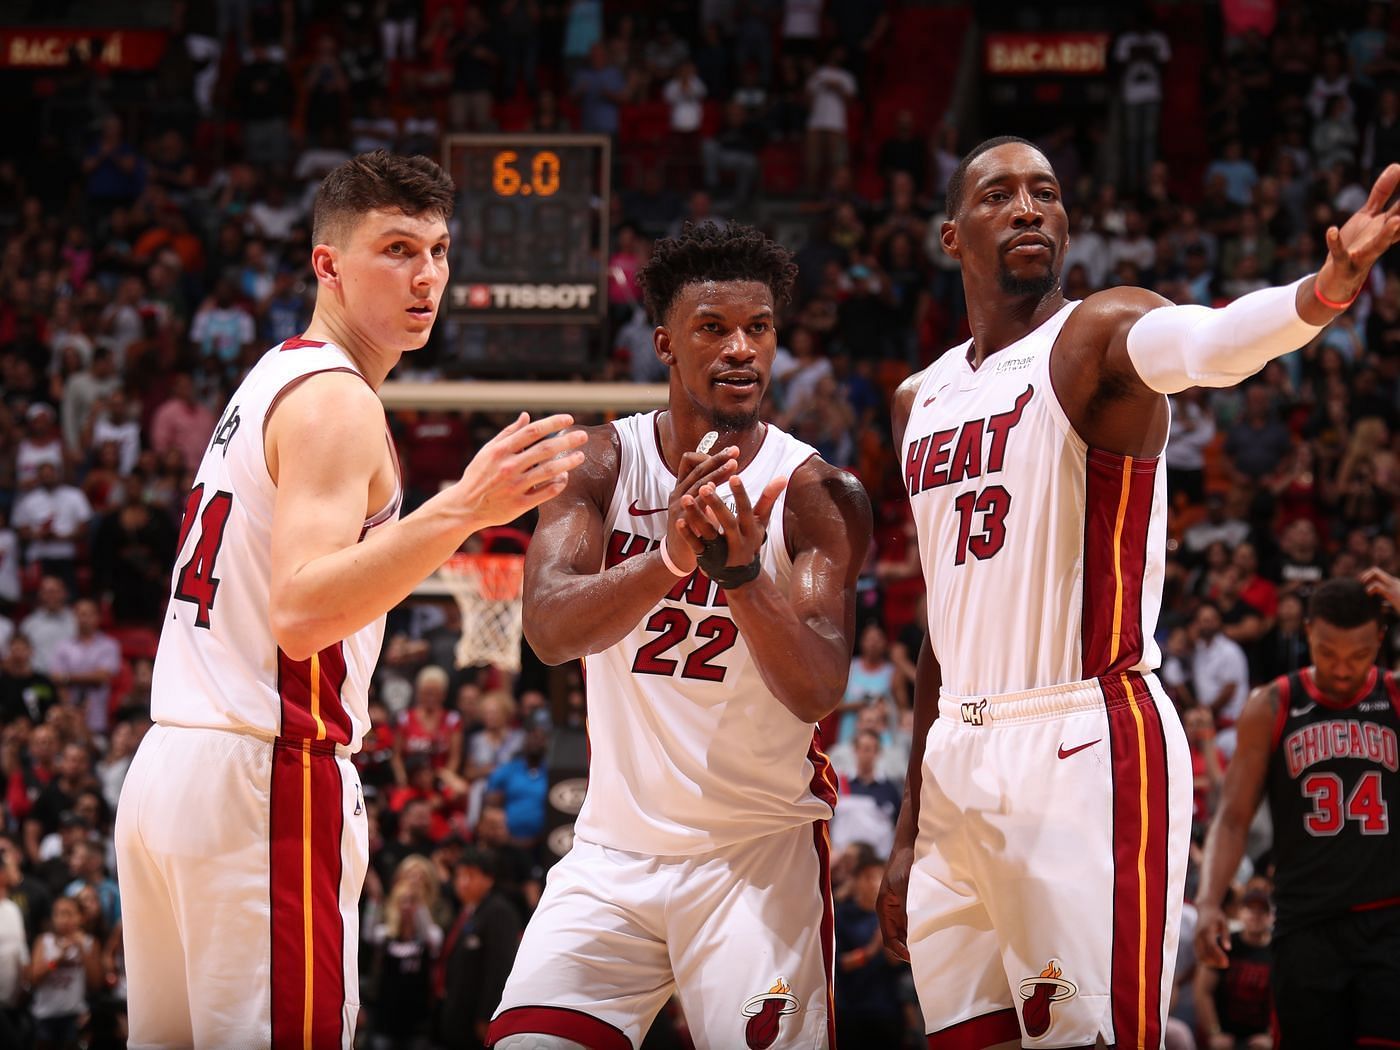 The Miami Heat just got annihilated by the Boston Celtics at home in Game 2. [Photo: Heat Nation]